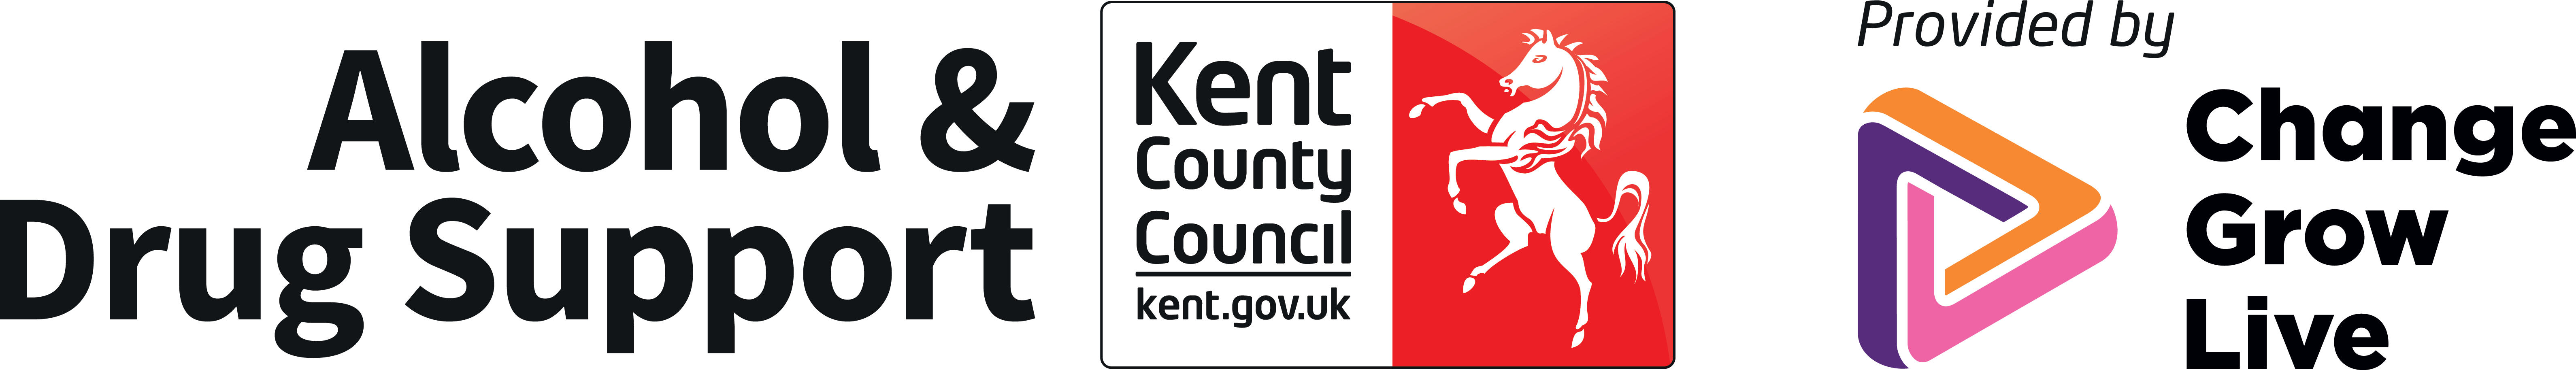 Alcohol and Drug Support, Kent County Council, Provided by Change Grow Live